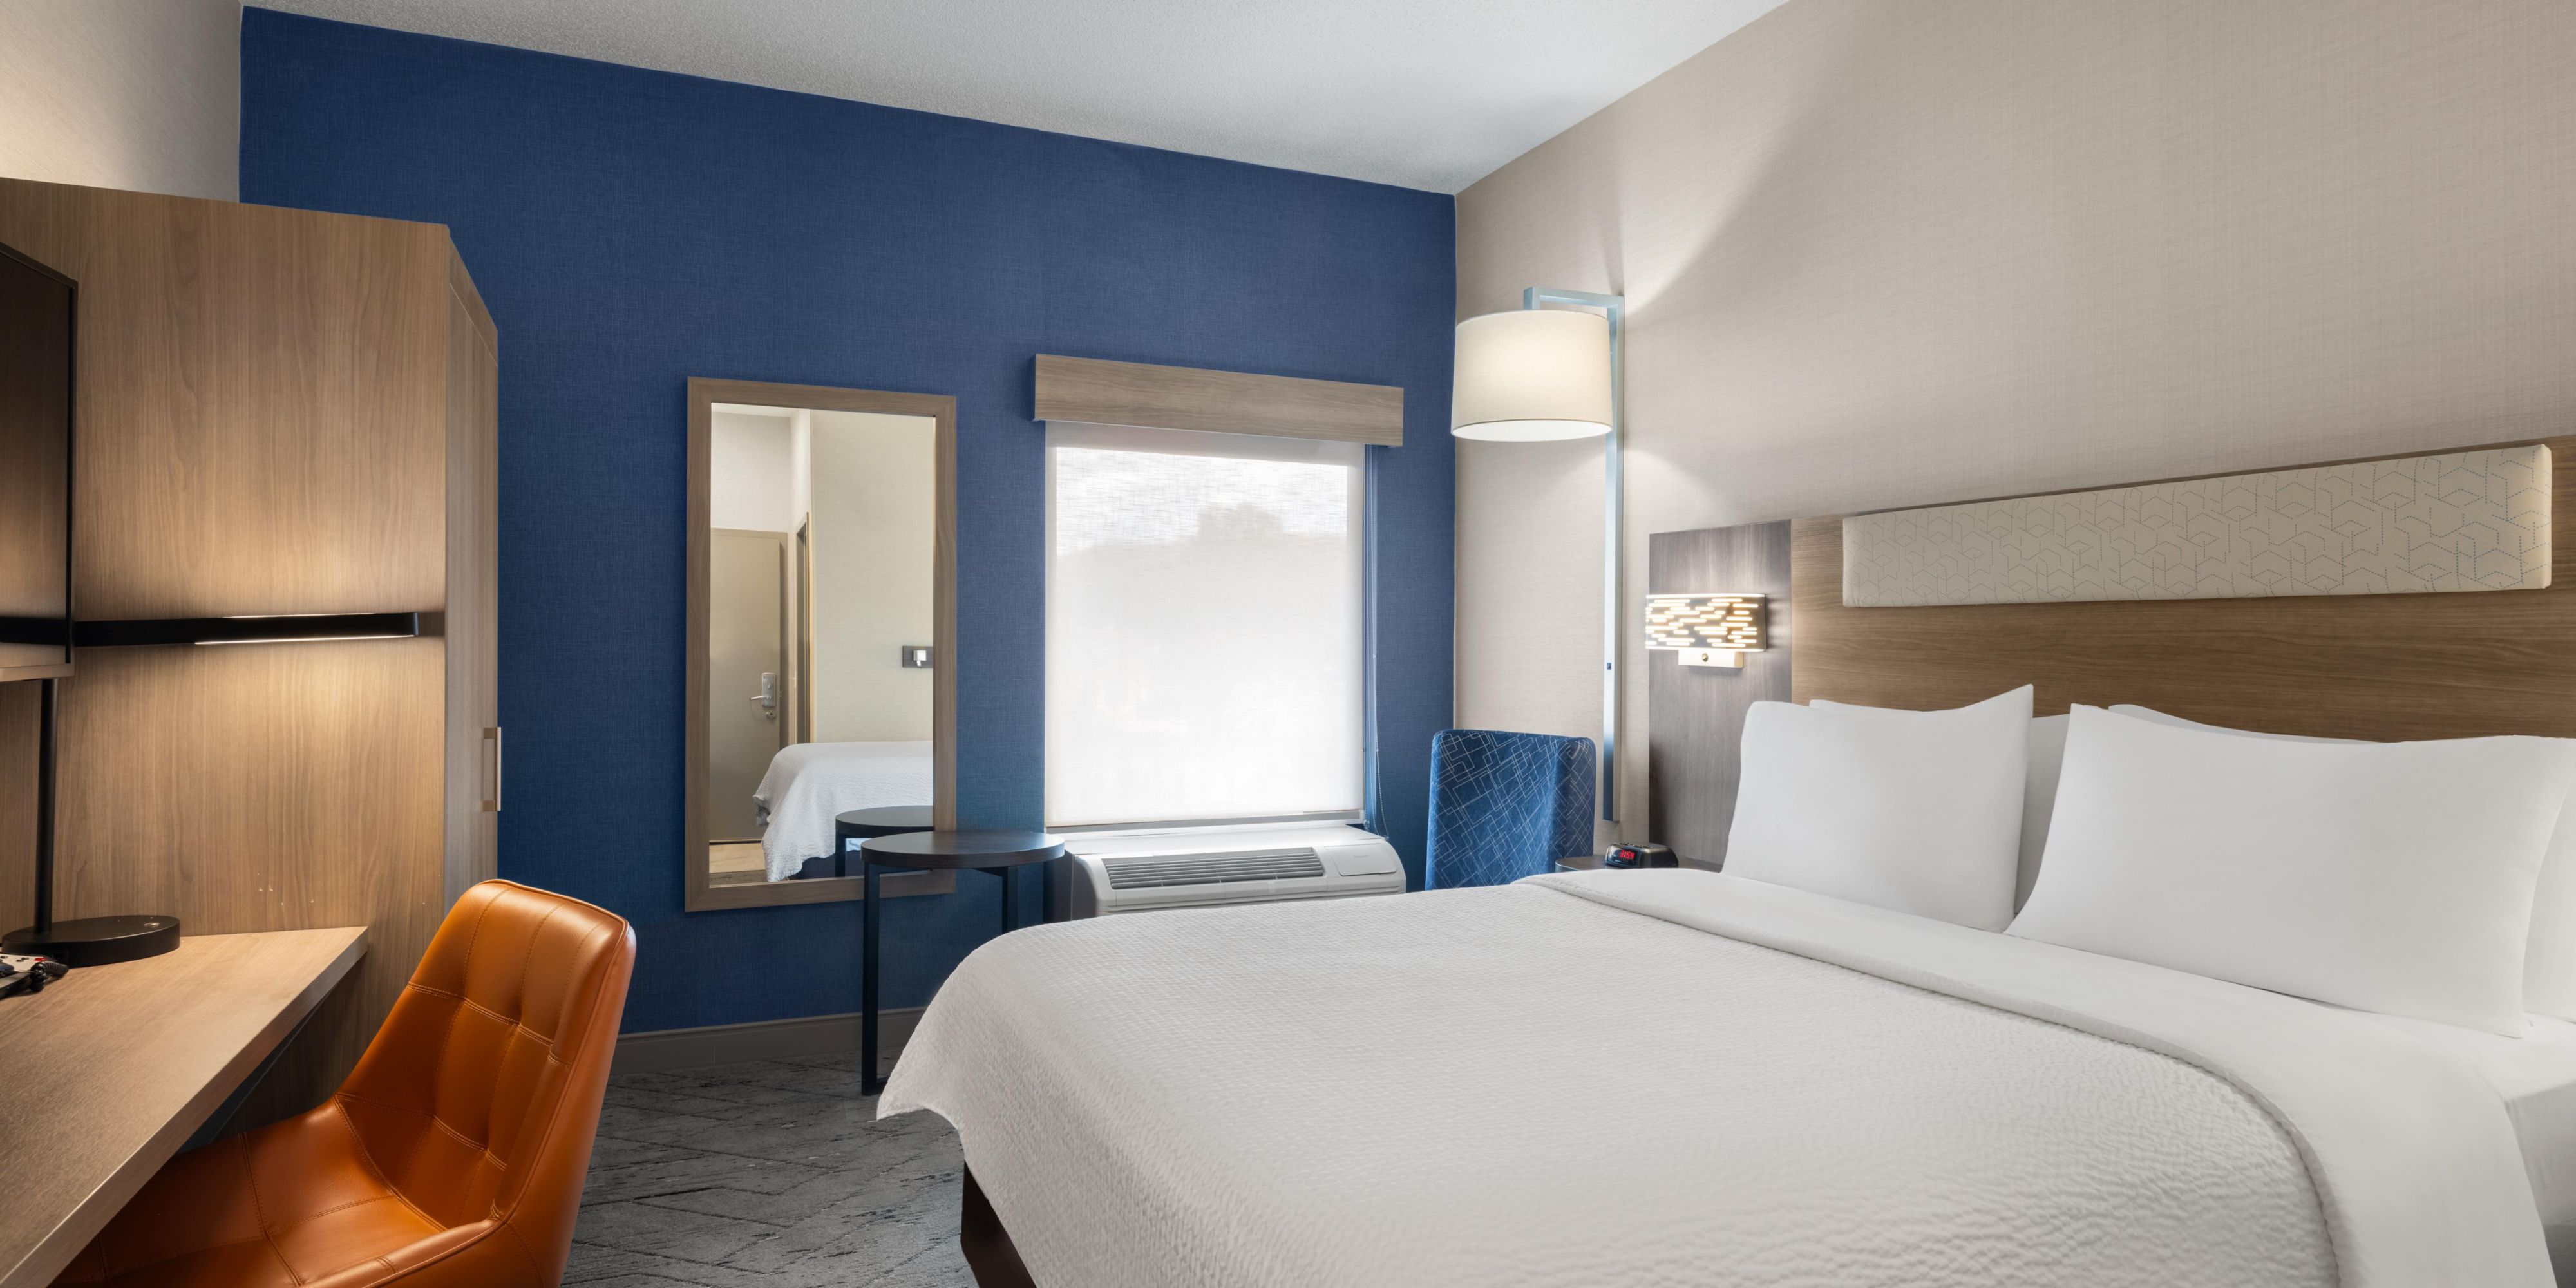 The Holiday Inn Express in Meadville is newly renovated with 68 pristine but cozy rooms. We have a brand new look but have our guest favorites, a free hot breakfast, a sparkling clean pool and hot tub, and best of all, the friendliest staff in the area.